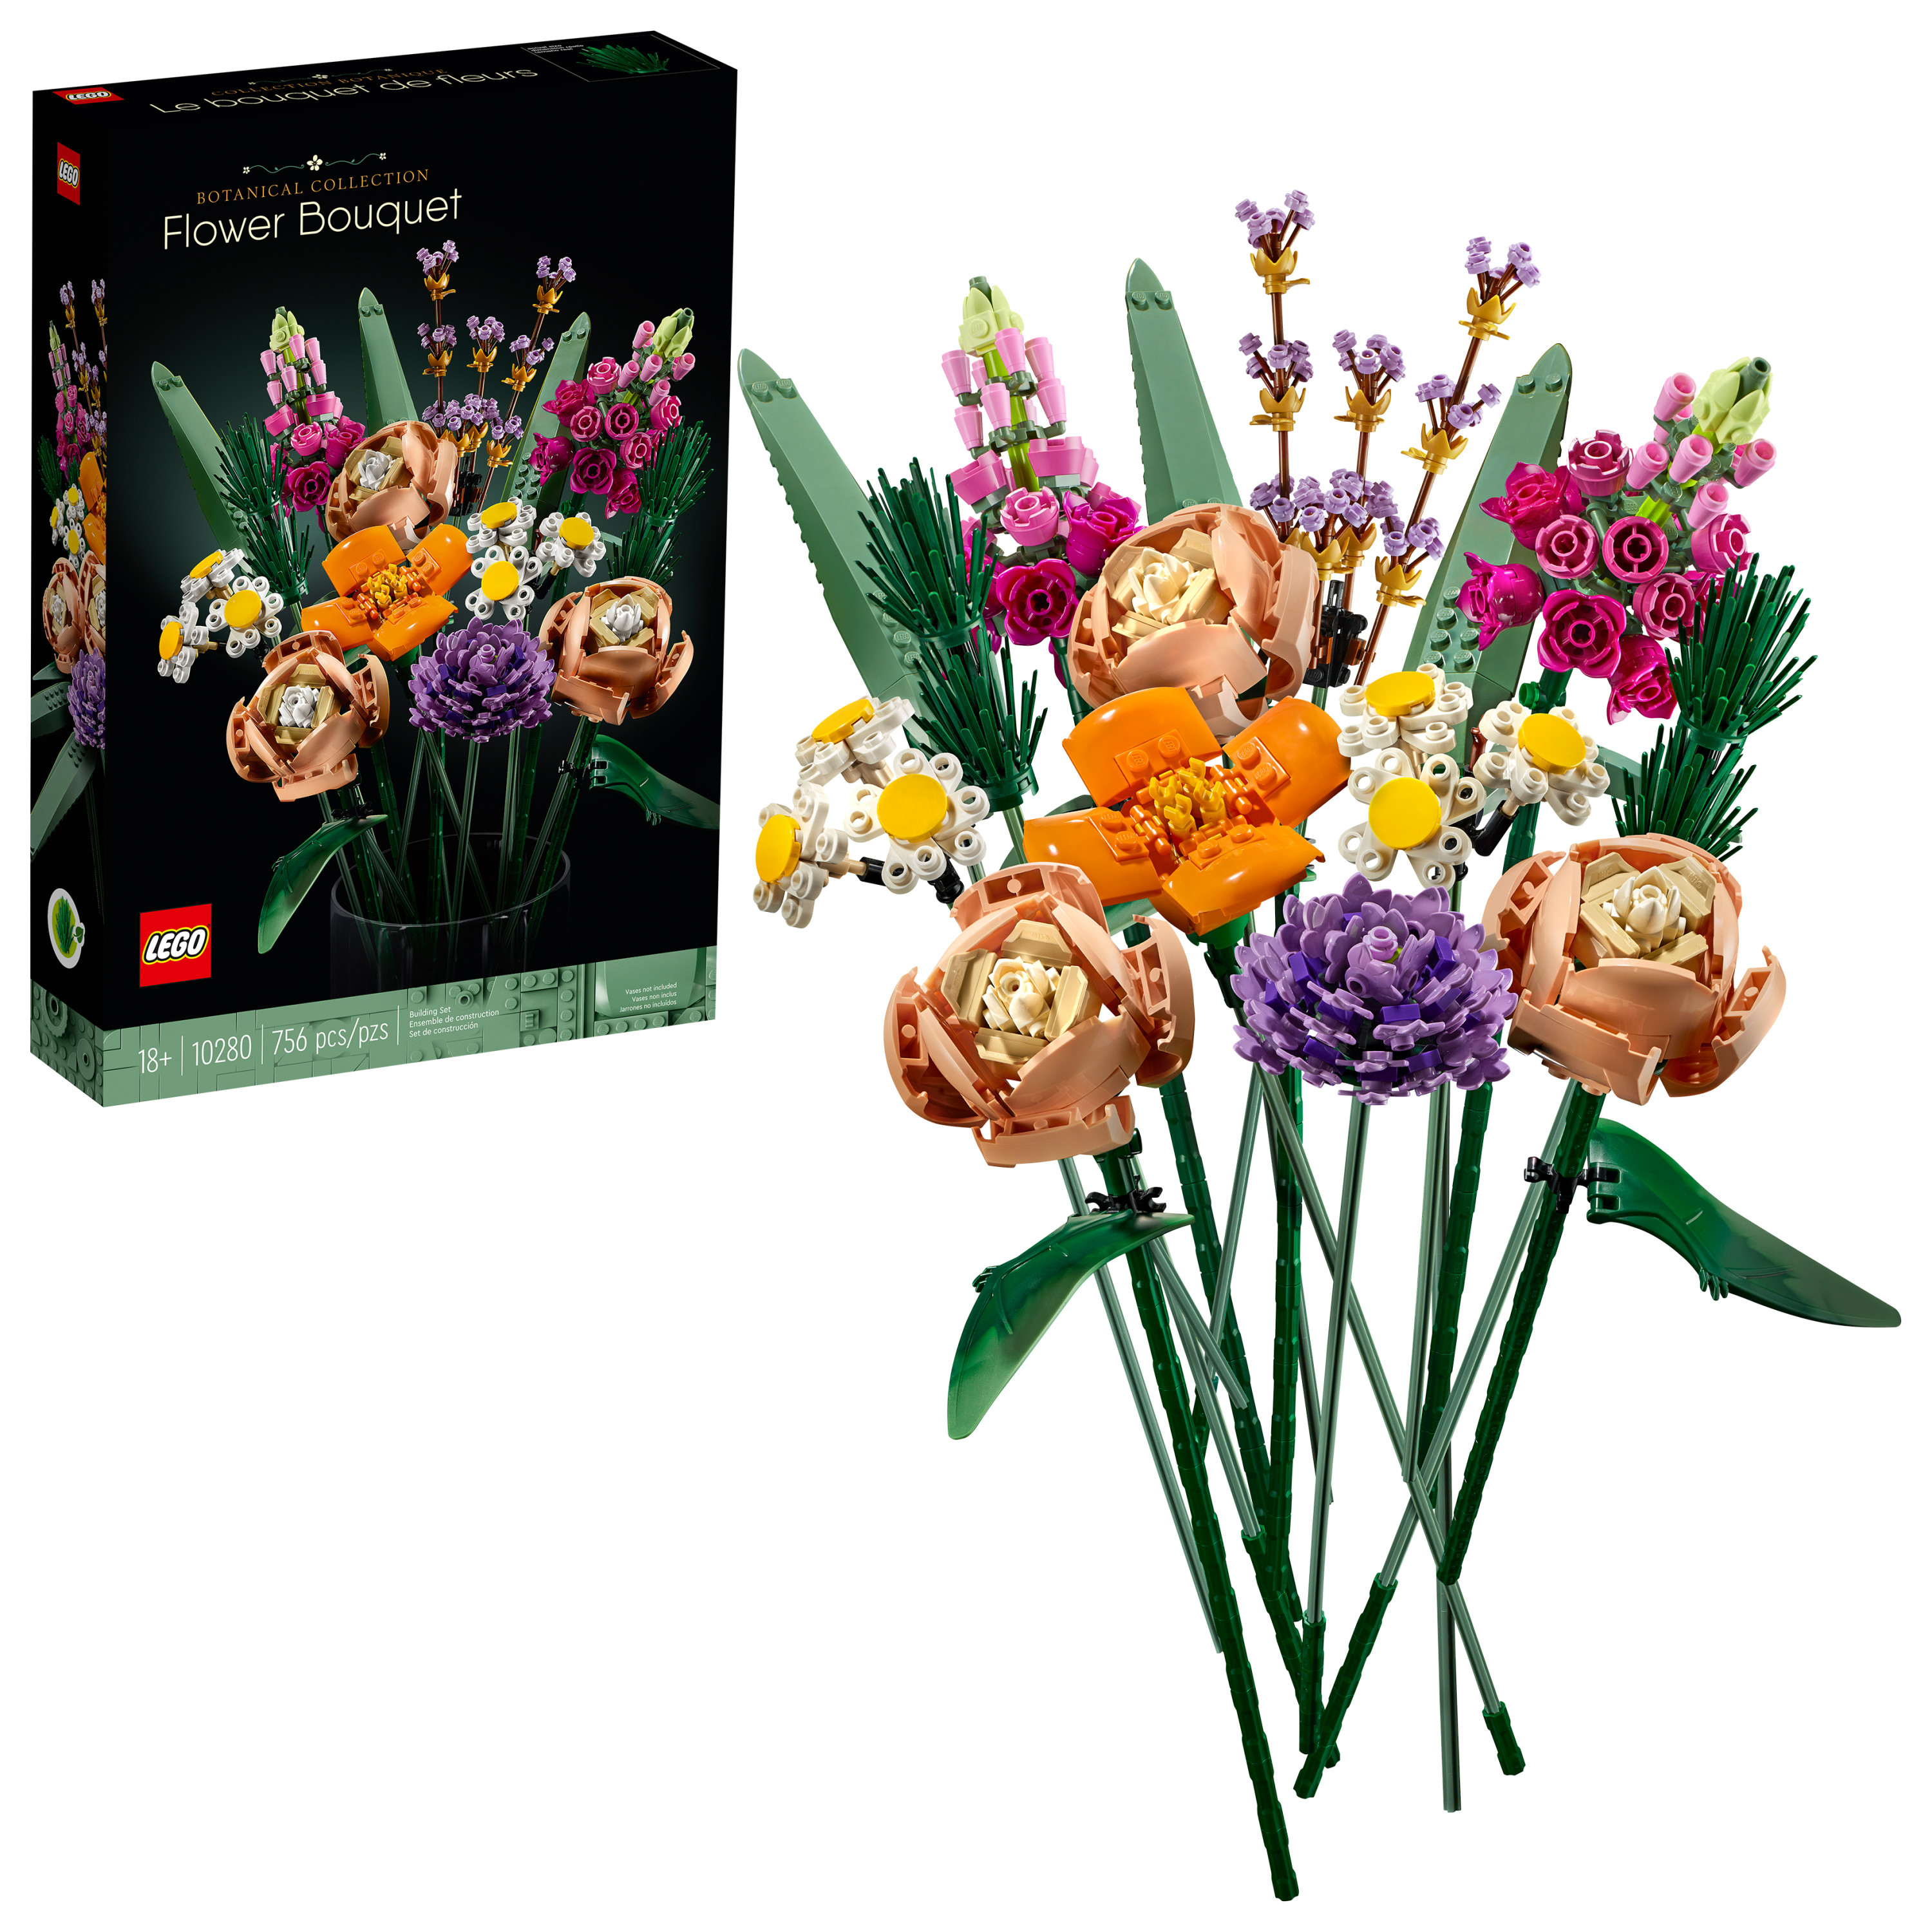 LEGO Flower Bouquet 10280  $40 + free shipping